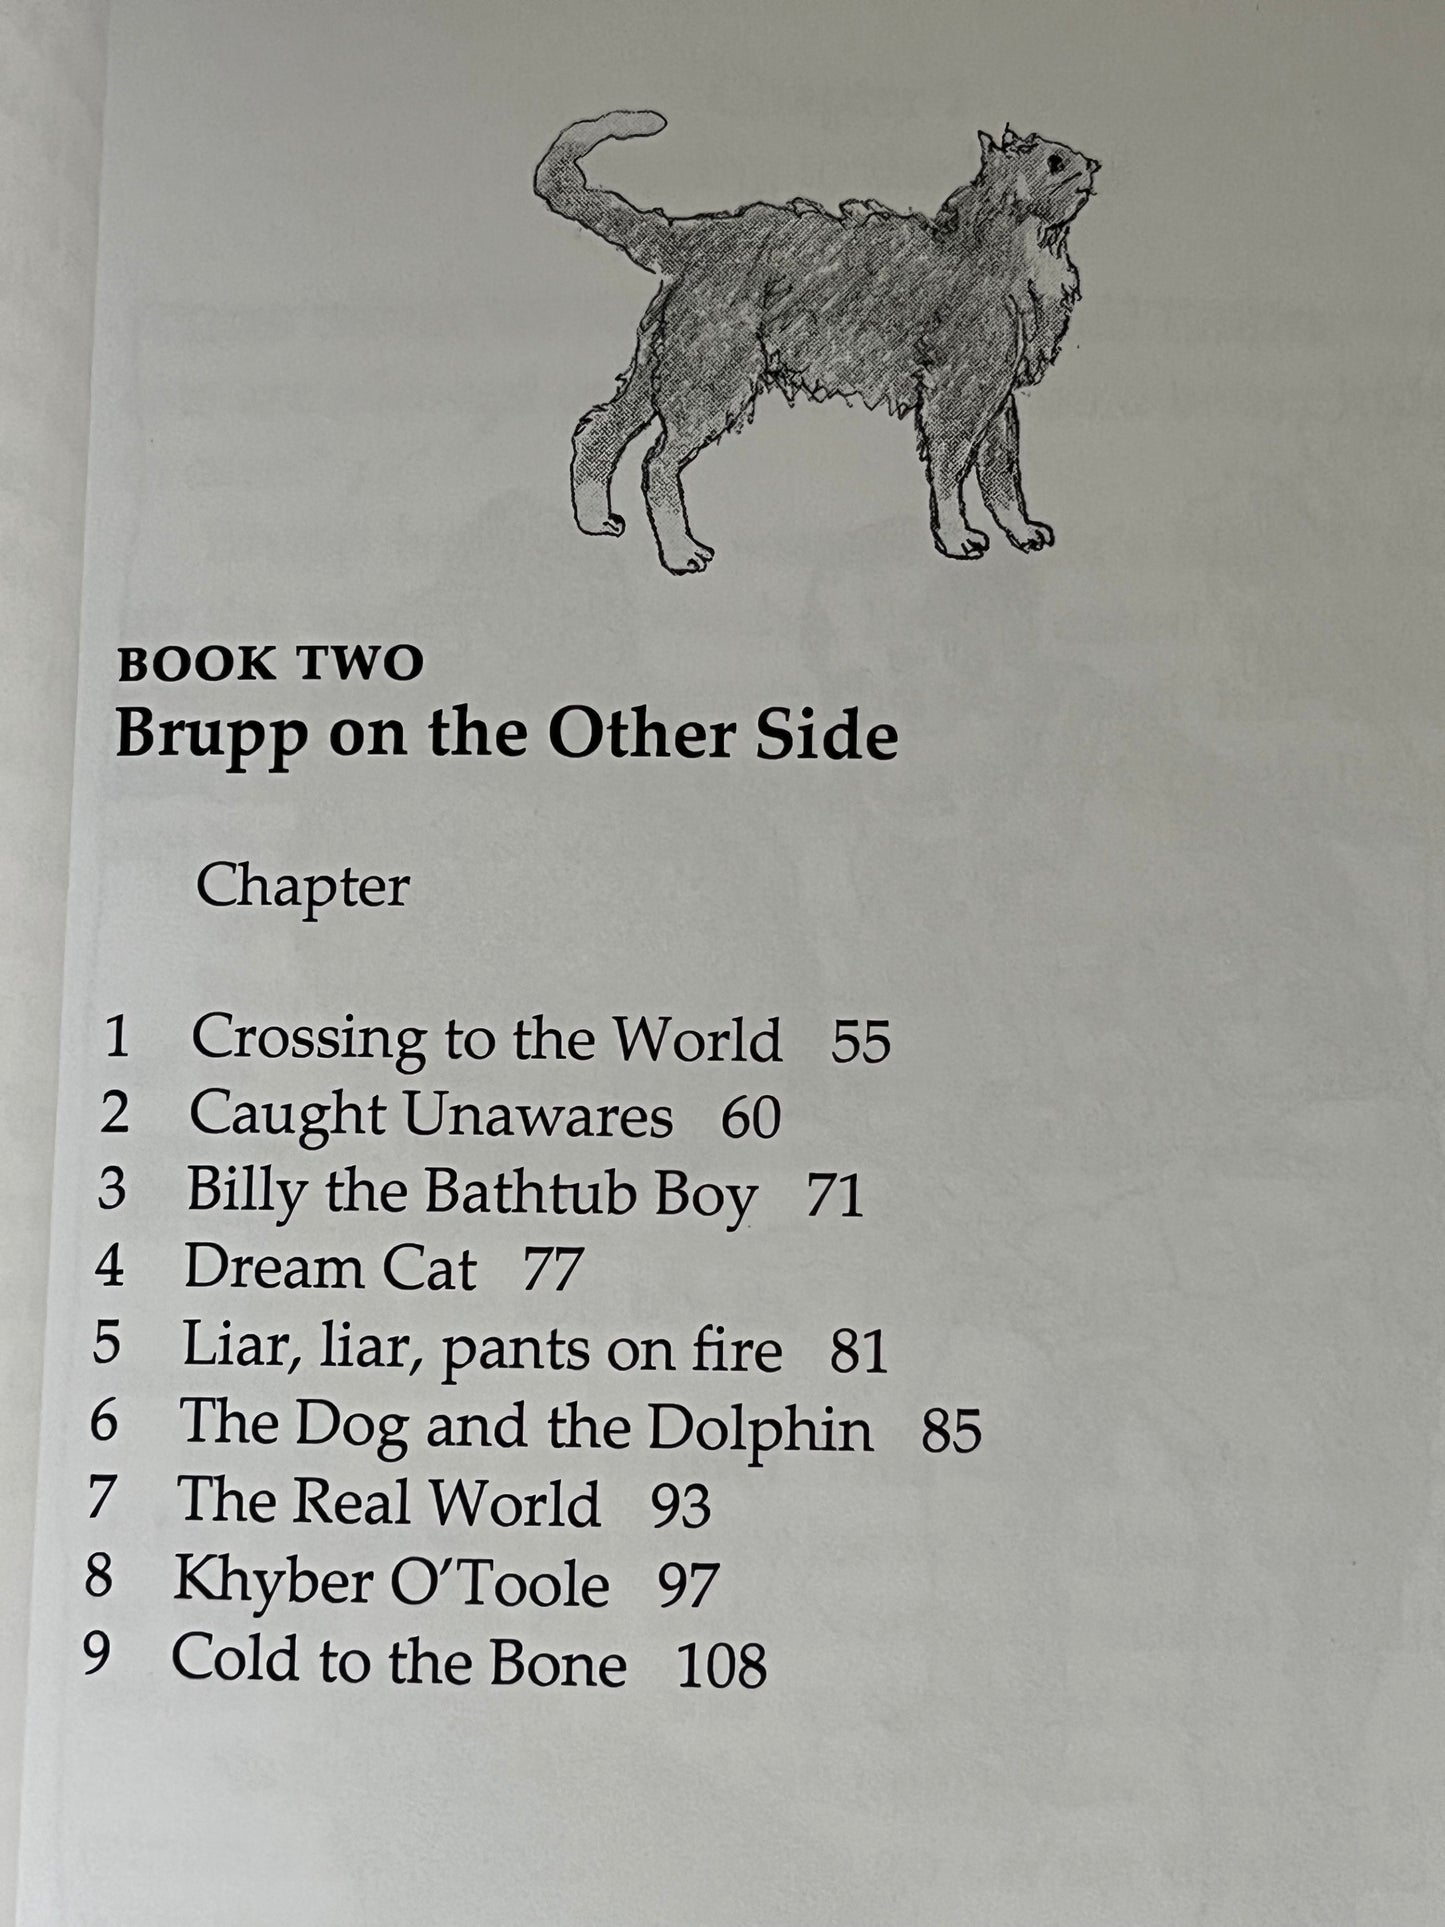 Chapter Book for Young Readers - ADVENTURES OF AN ISLAND CAT NAMED BRUPP